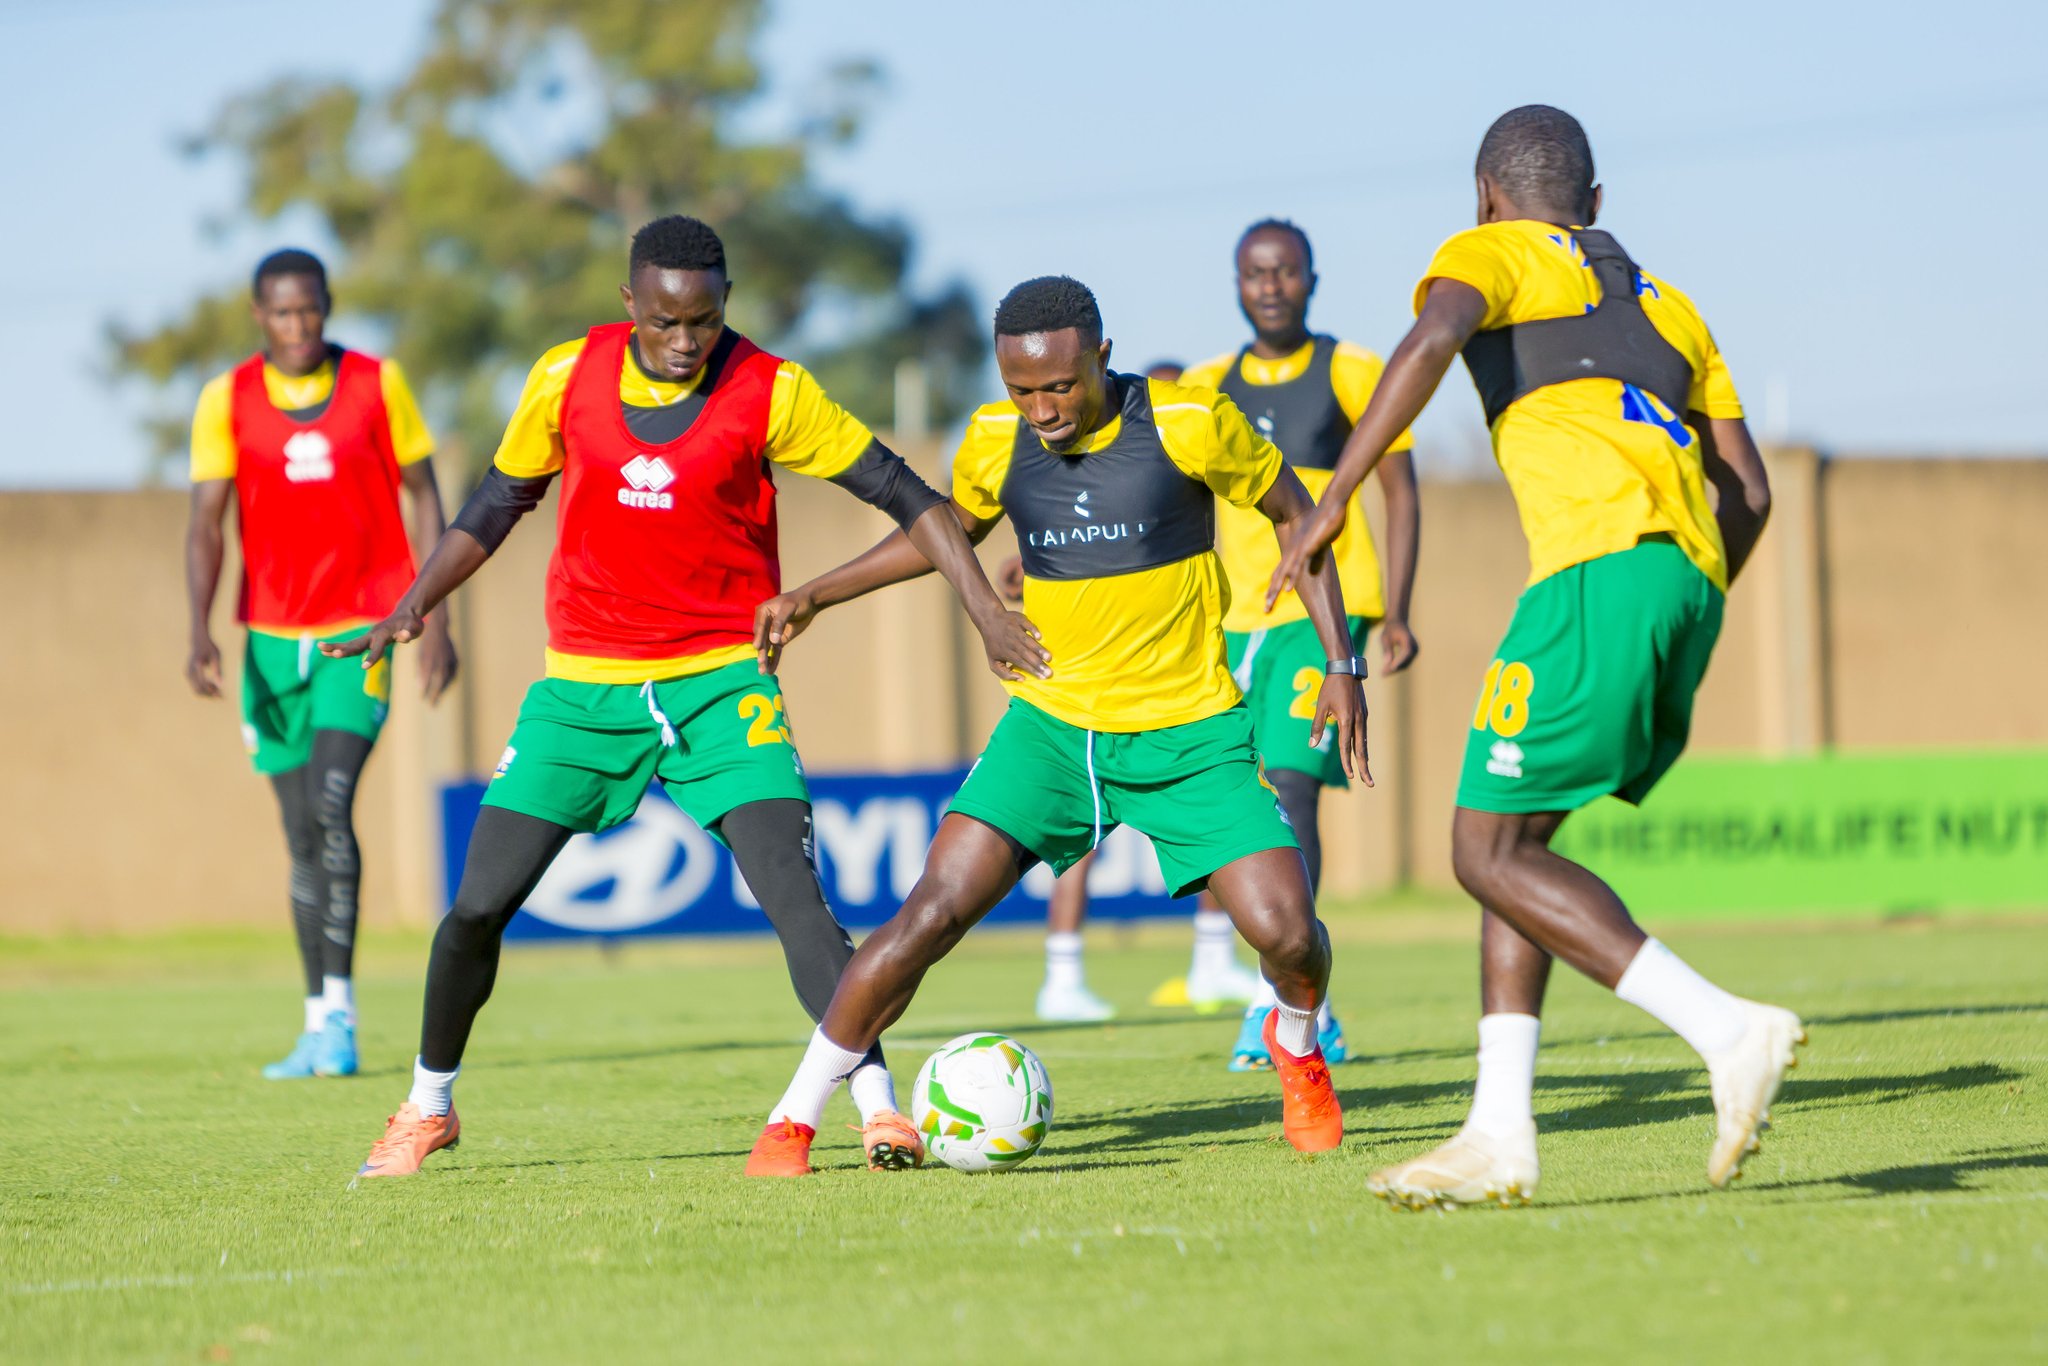 Rwanda national team players during a training session in South Africa ahead of the first leg match against Mozambique. Courtesy